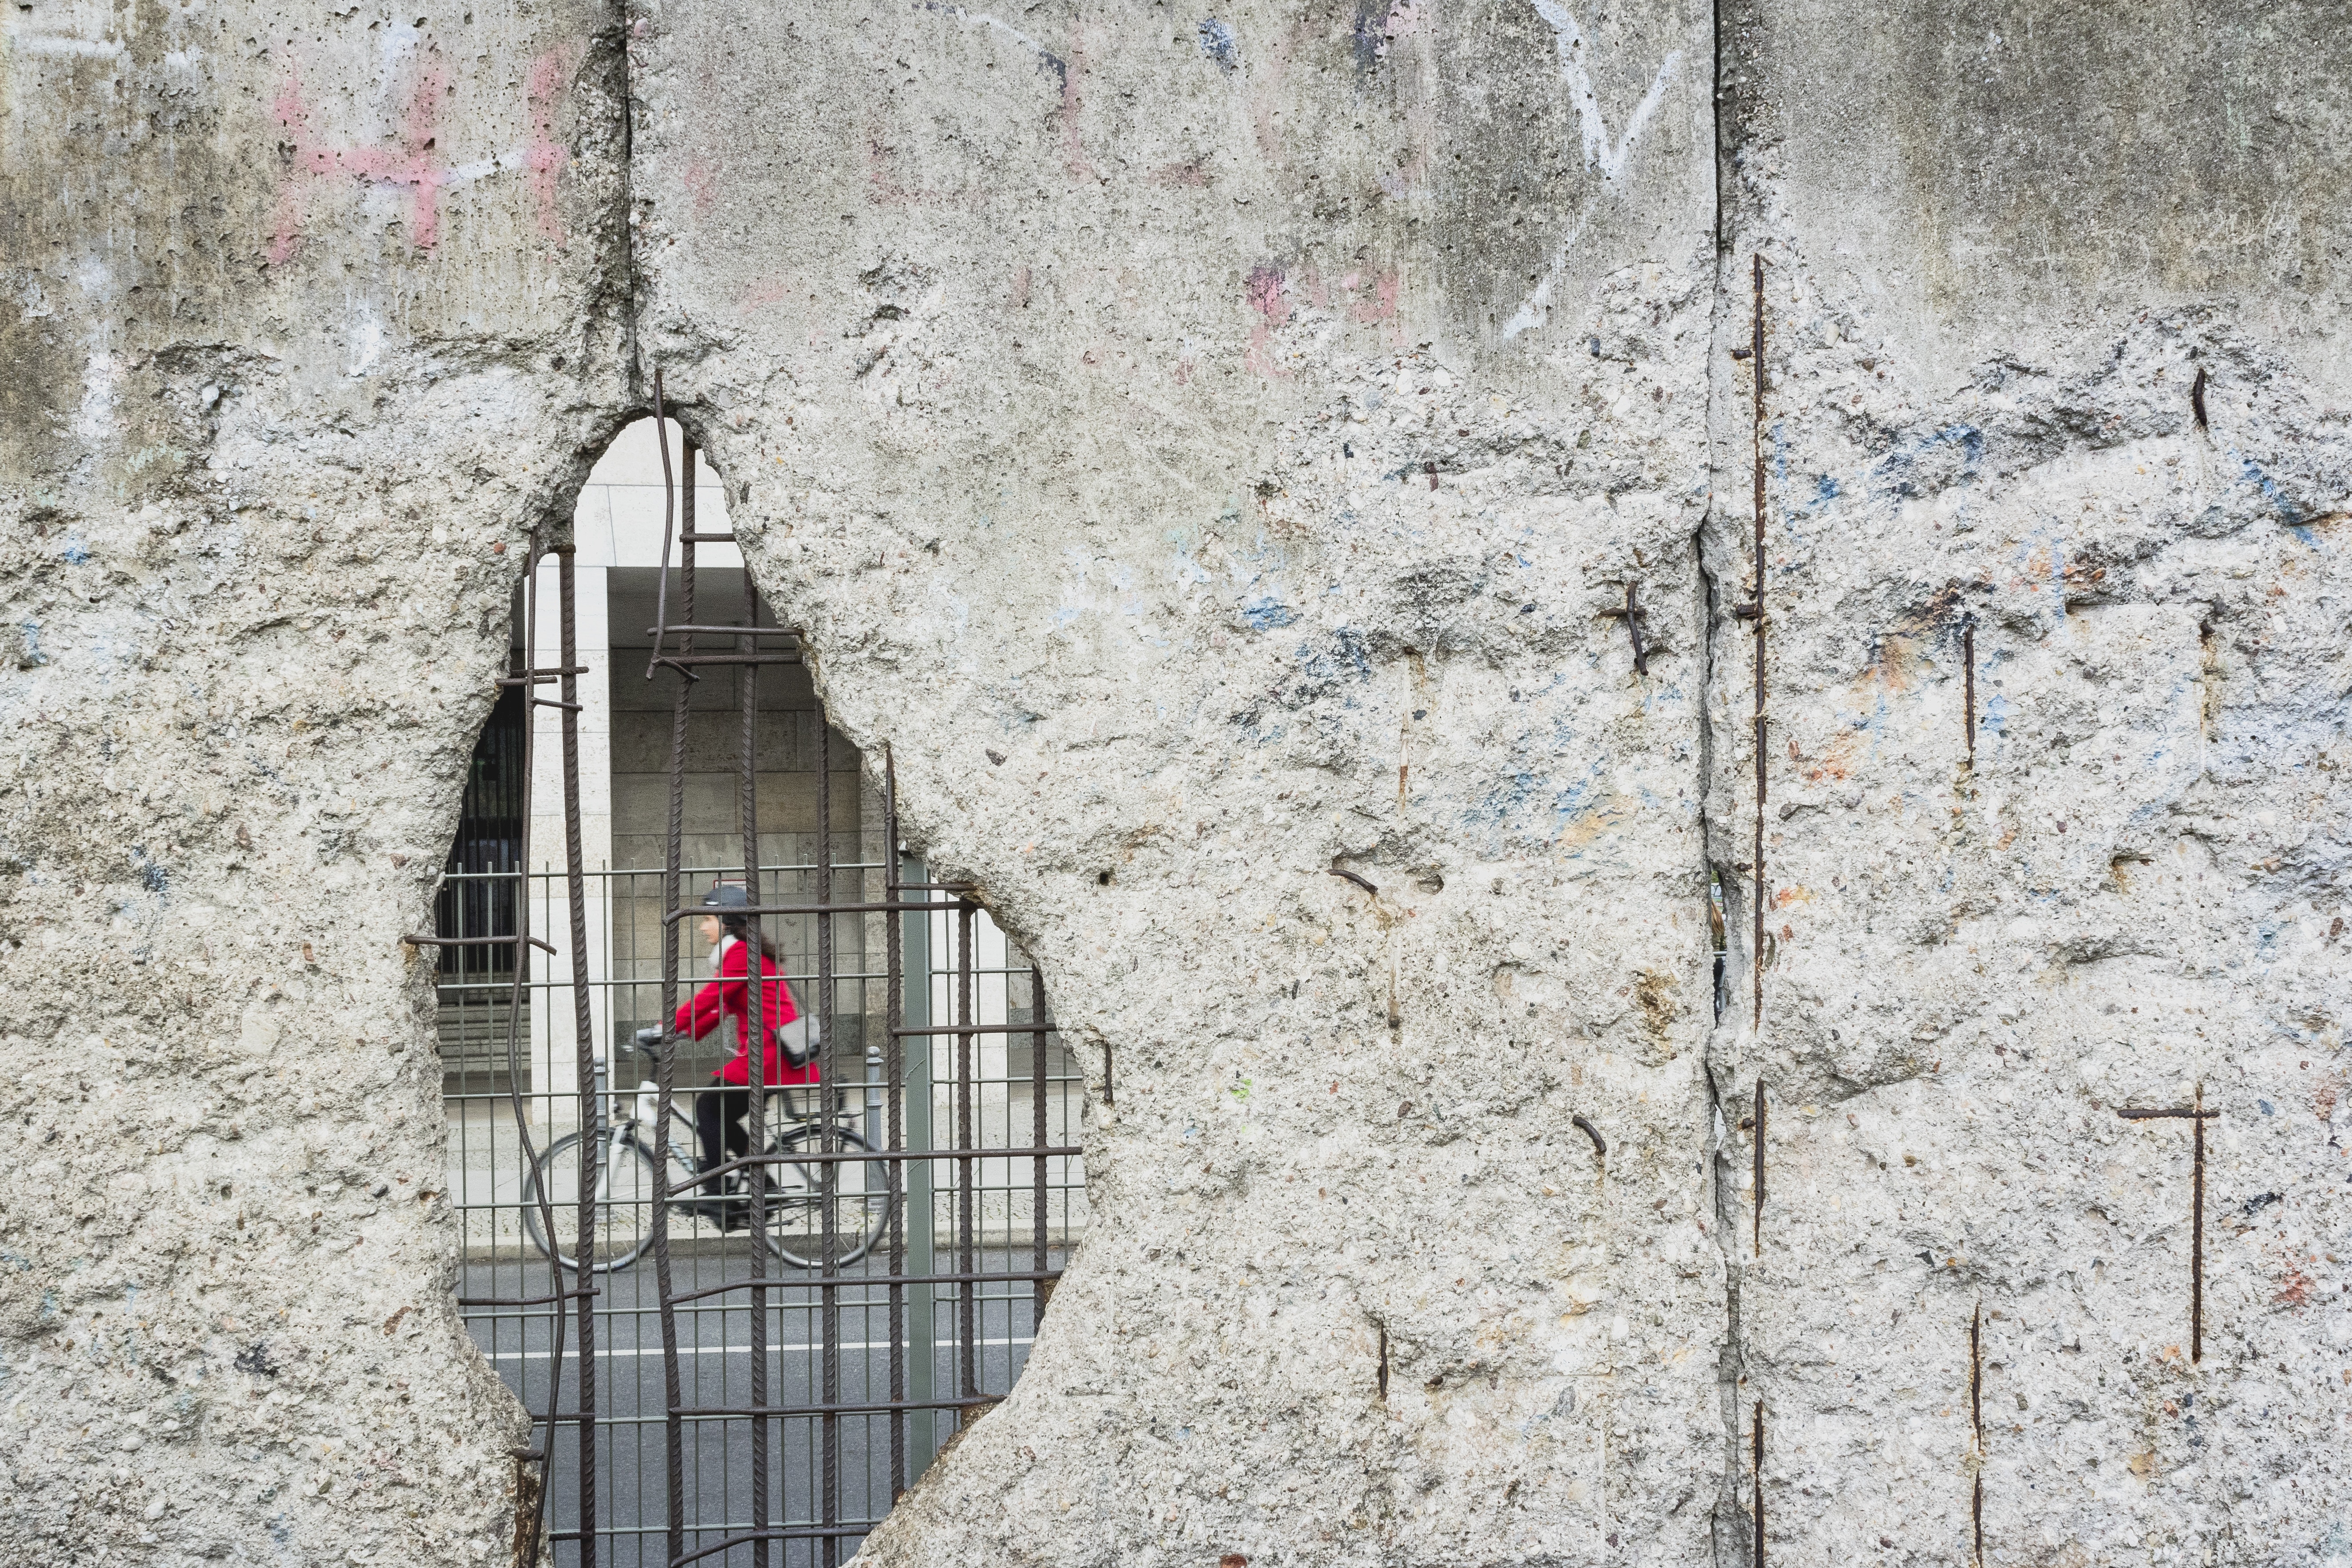 black haired female riding on bicycle seen through hole in gray concrete wall